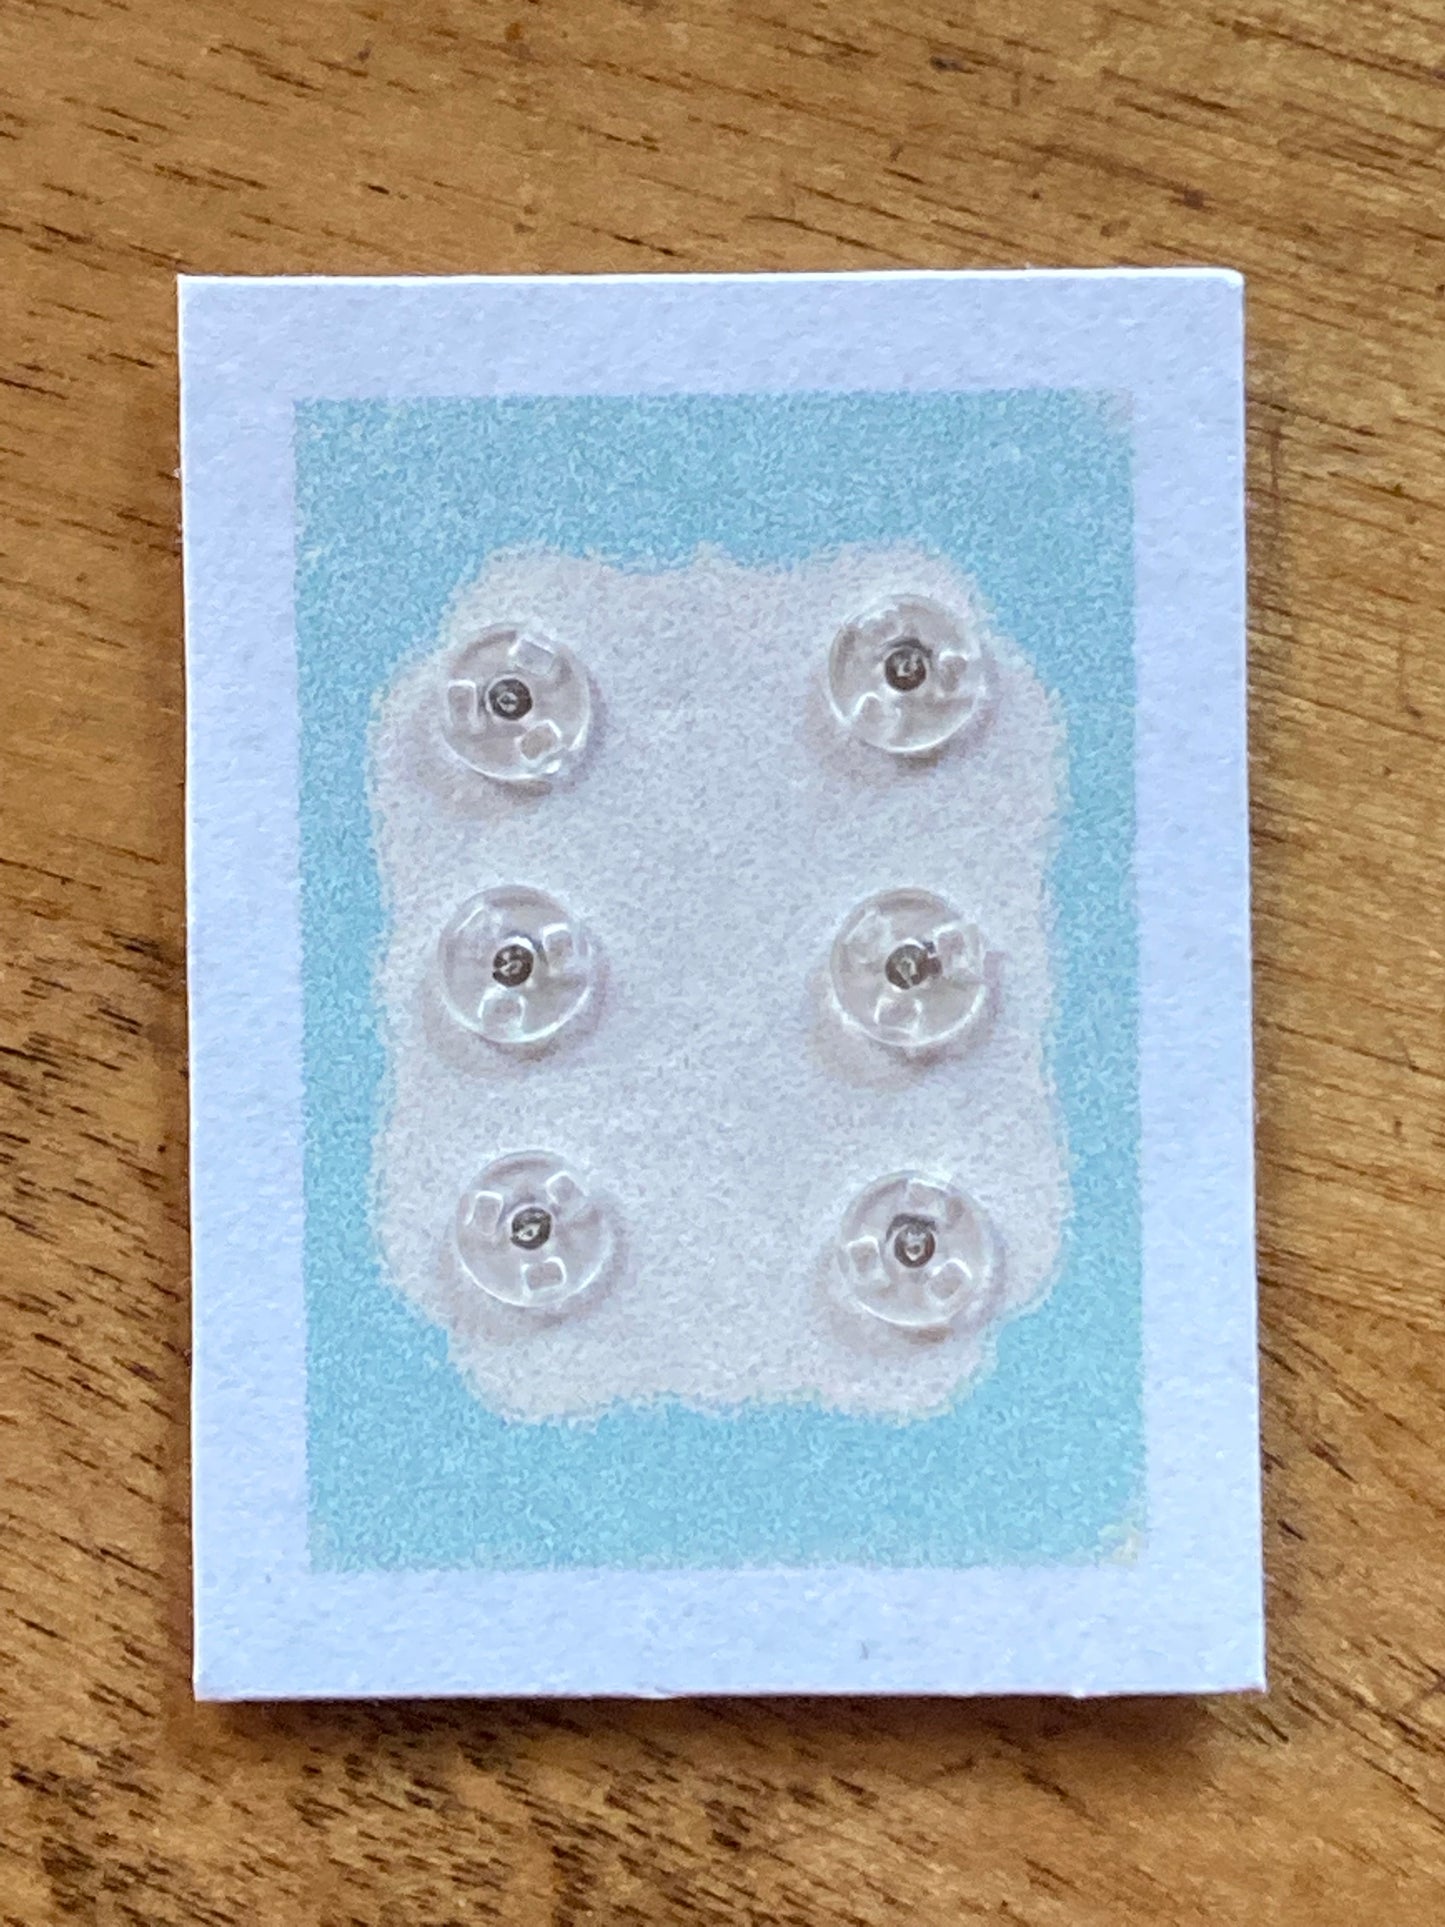 4mm Clear Snaps, set of 6